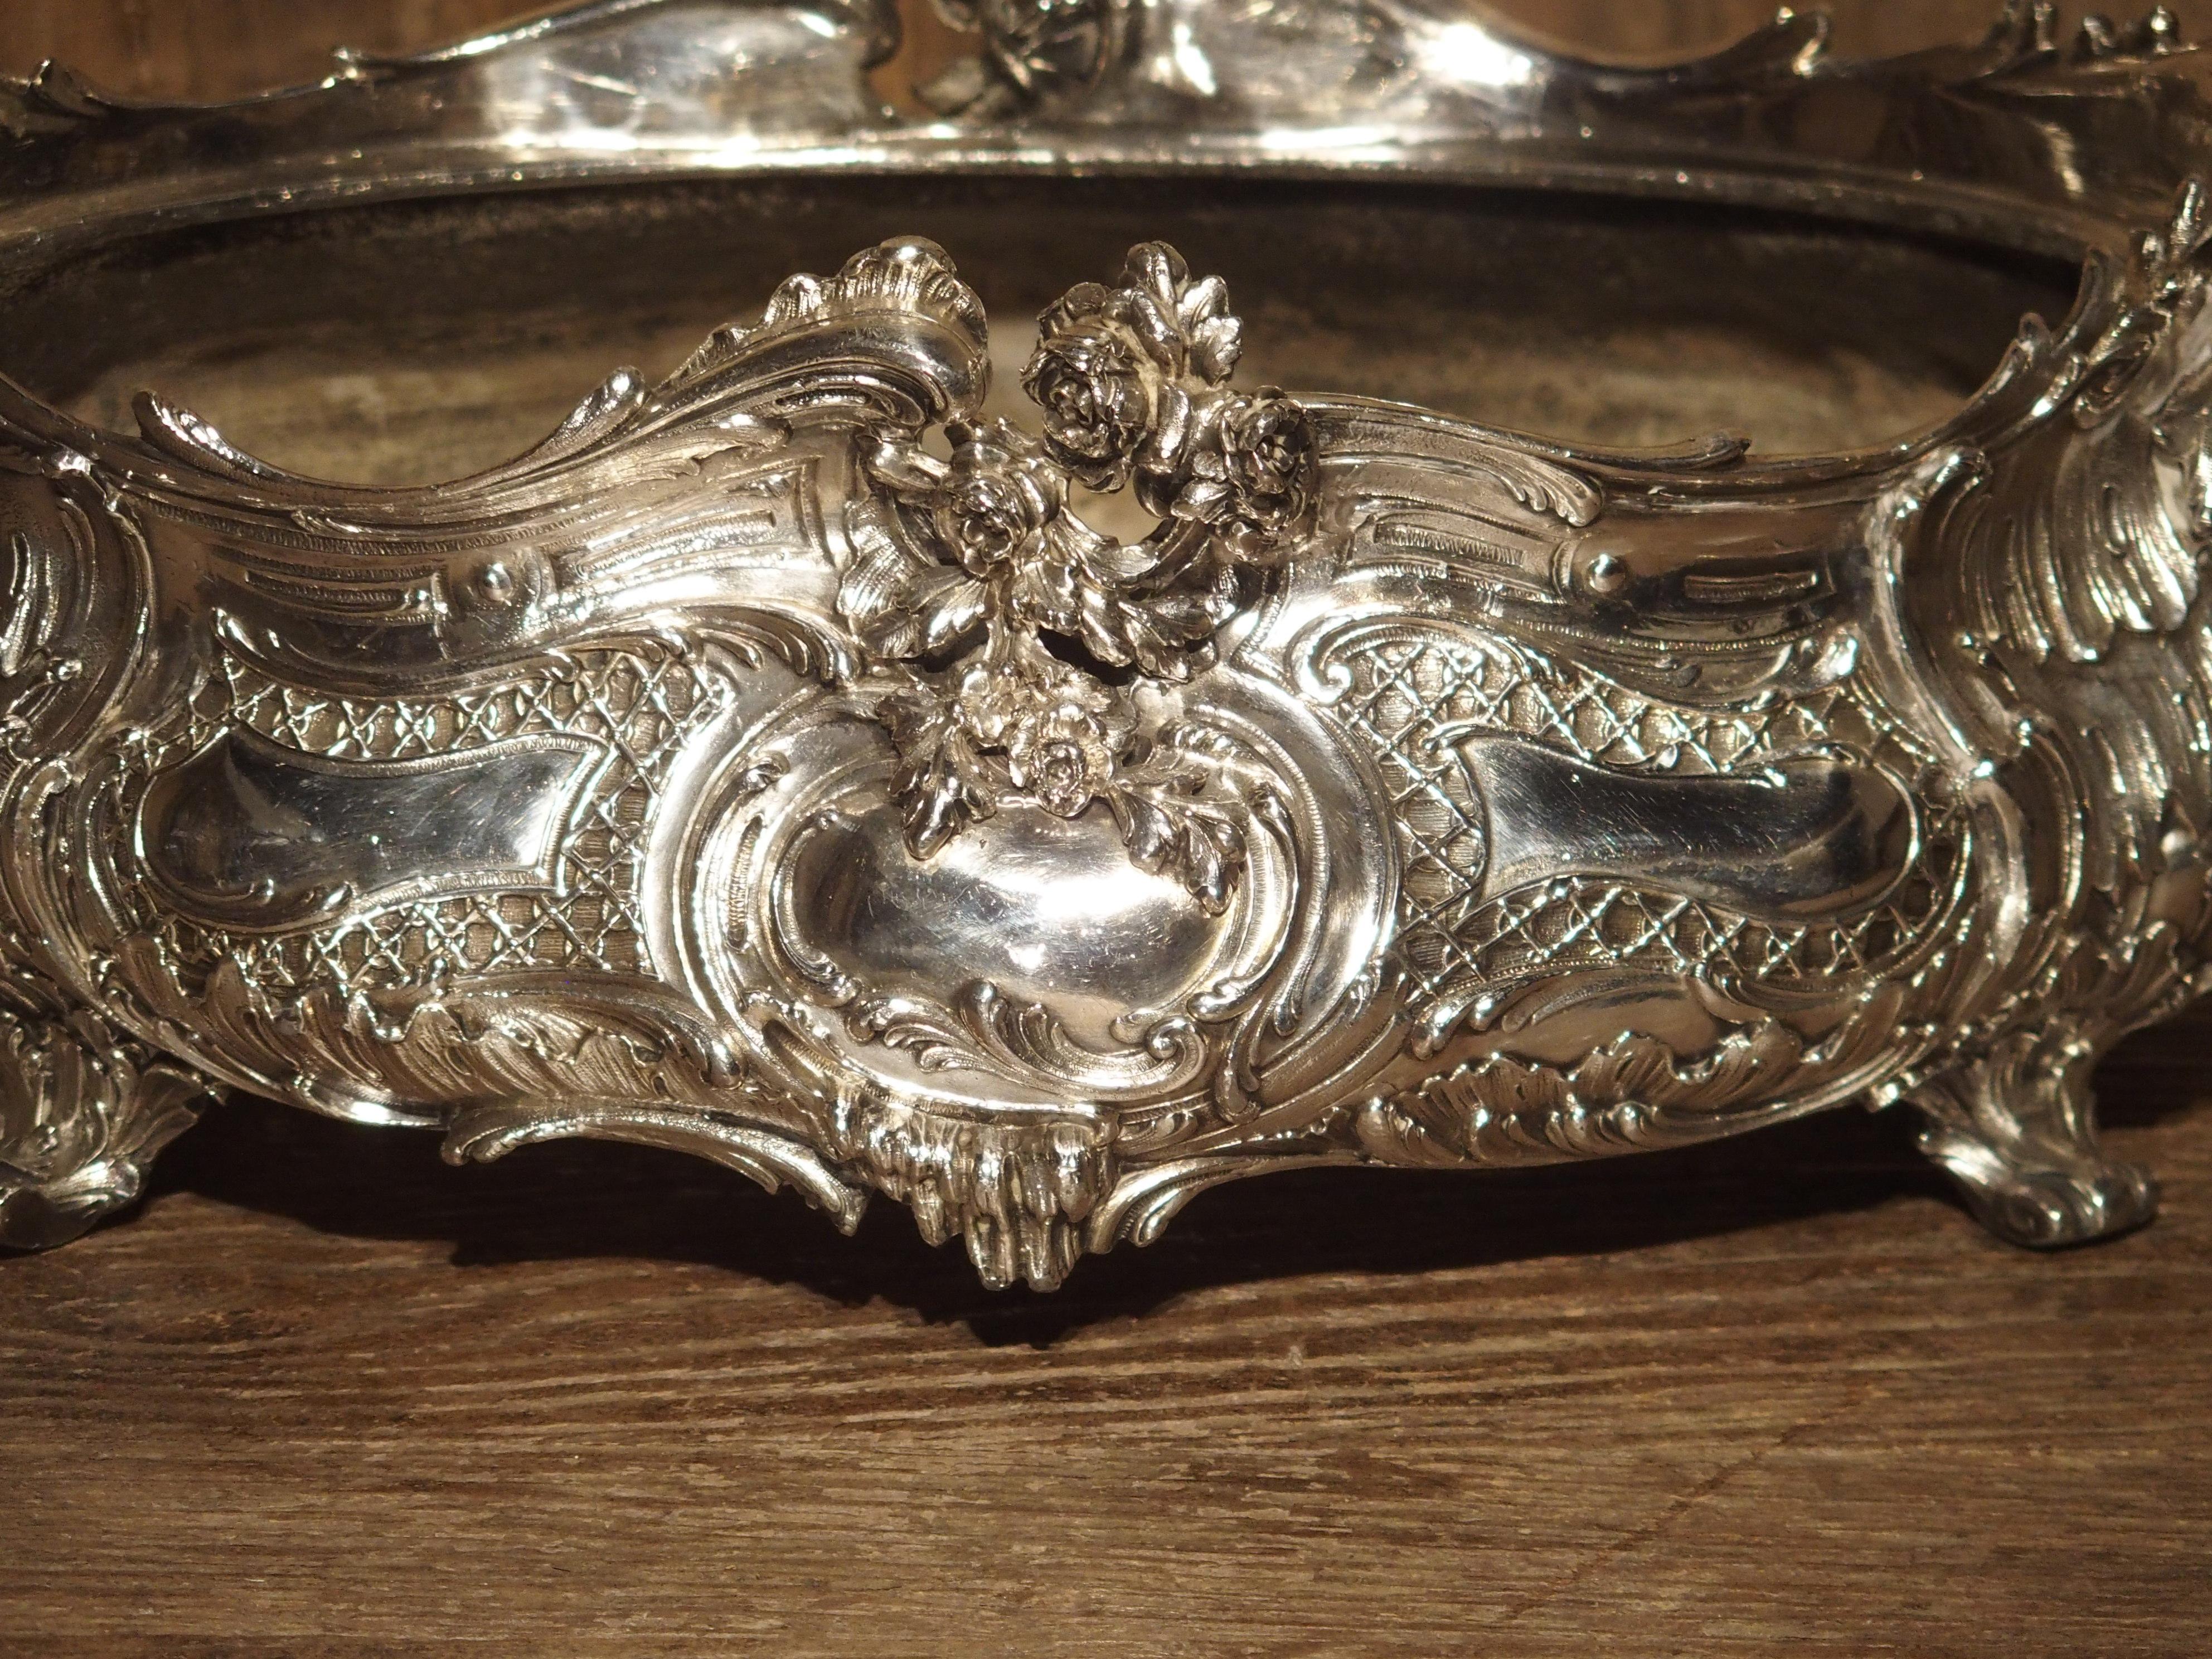 From France, this Louis XV style silvered bronze jardinière dates to the 19th century. It was made in the late 1800s, during a renewed interest in the great art of the 17th and 18th centuries. The motifs are those that were used during the 1700s: